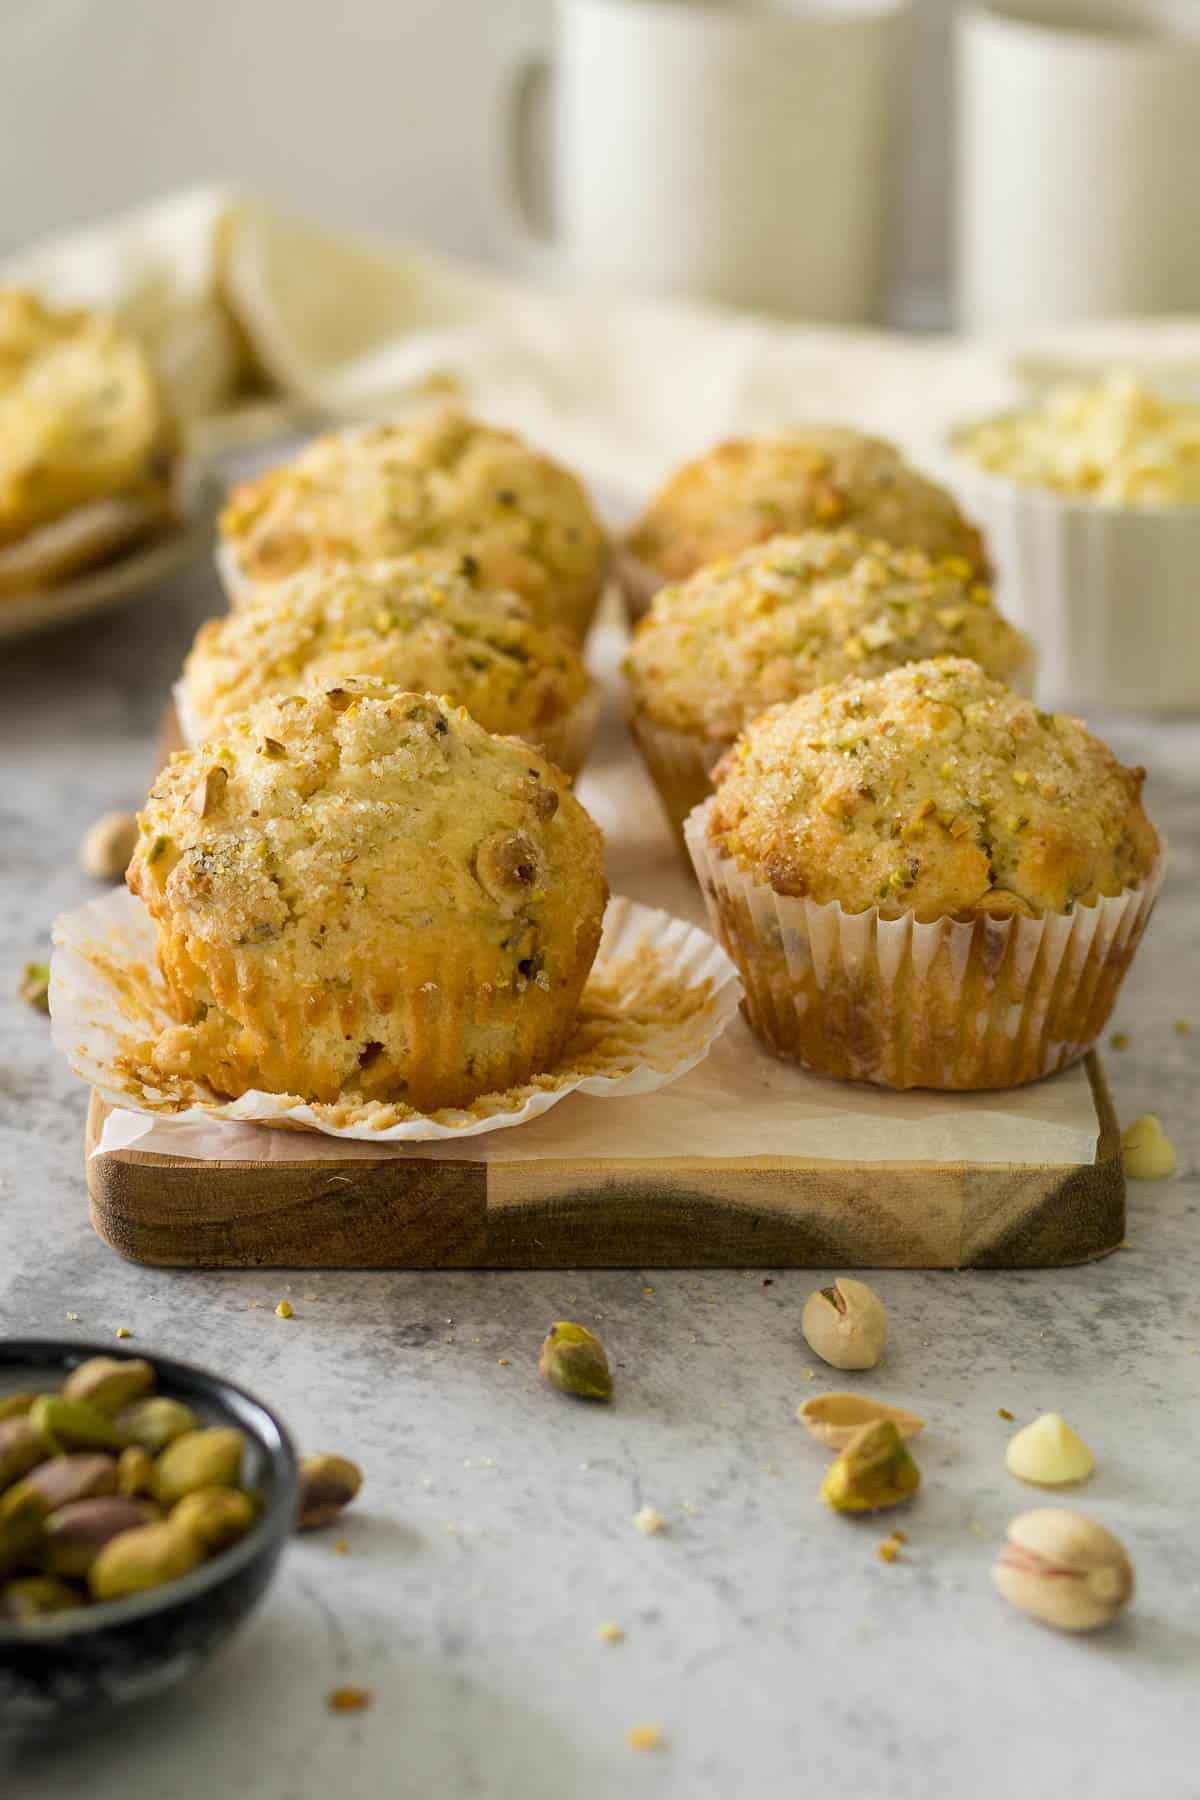 Pistacho muffins on a wooden serving board.